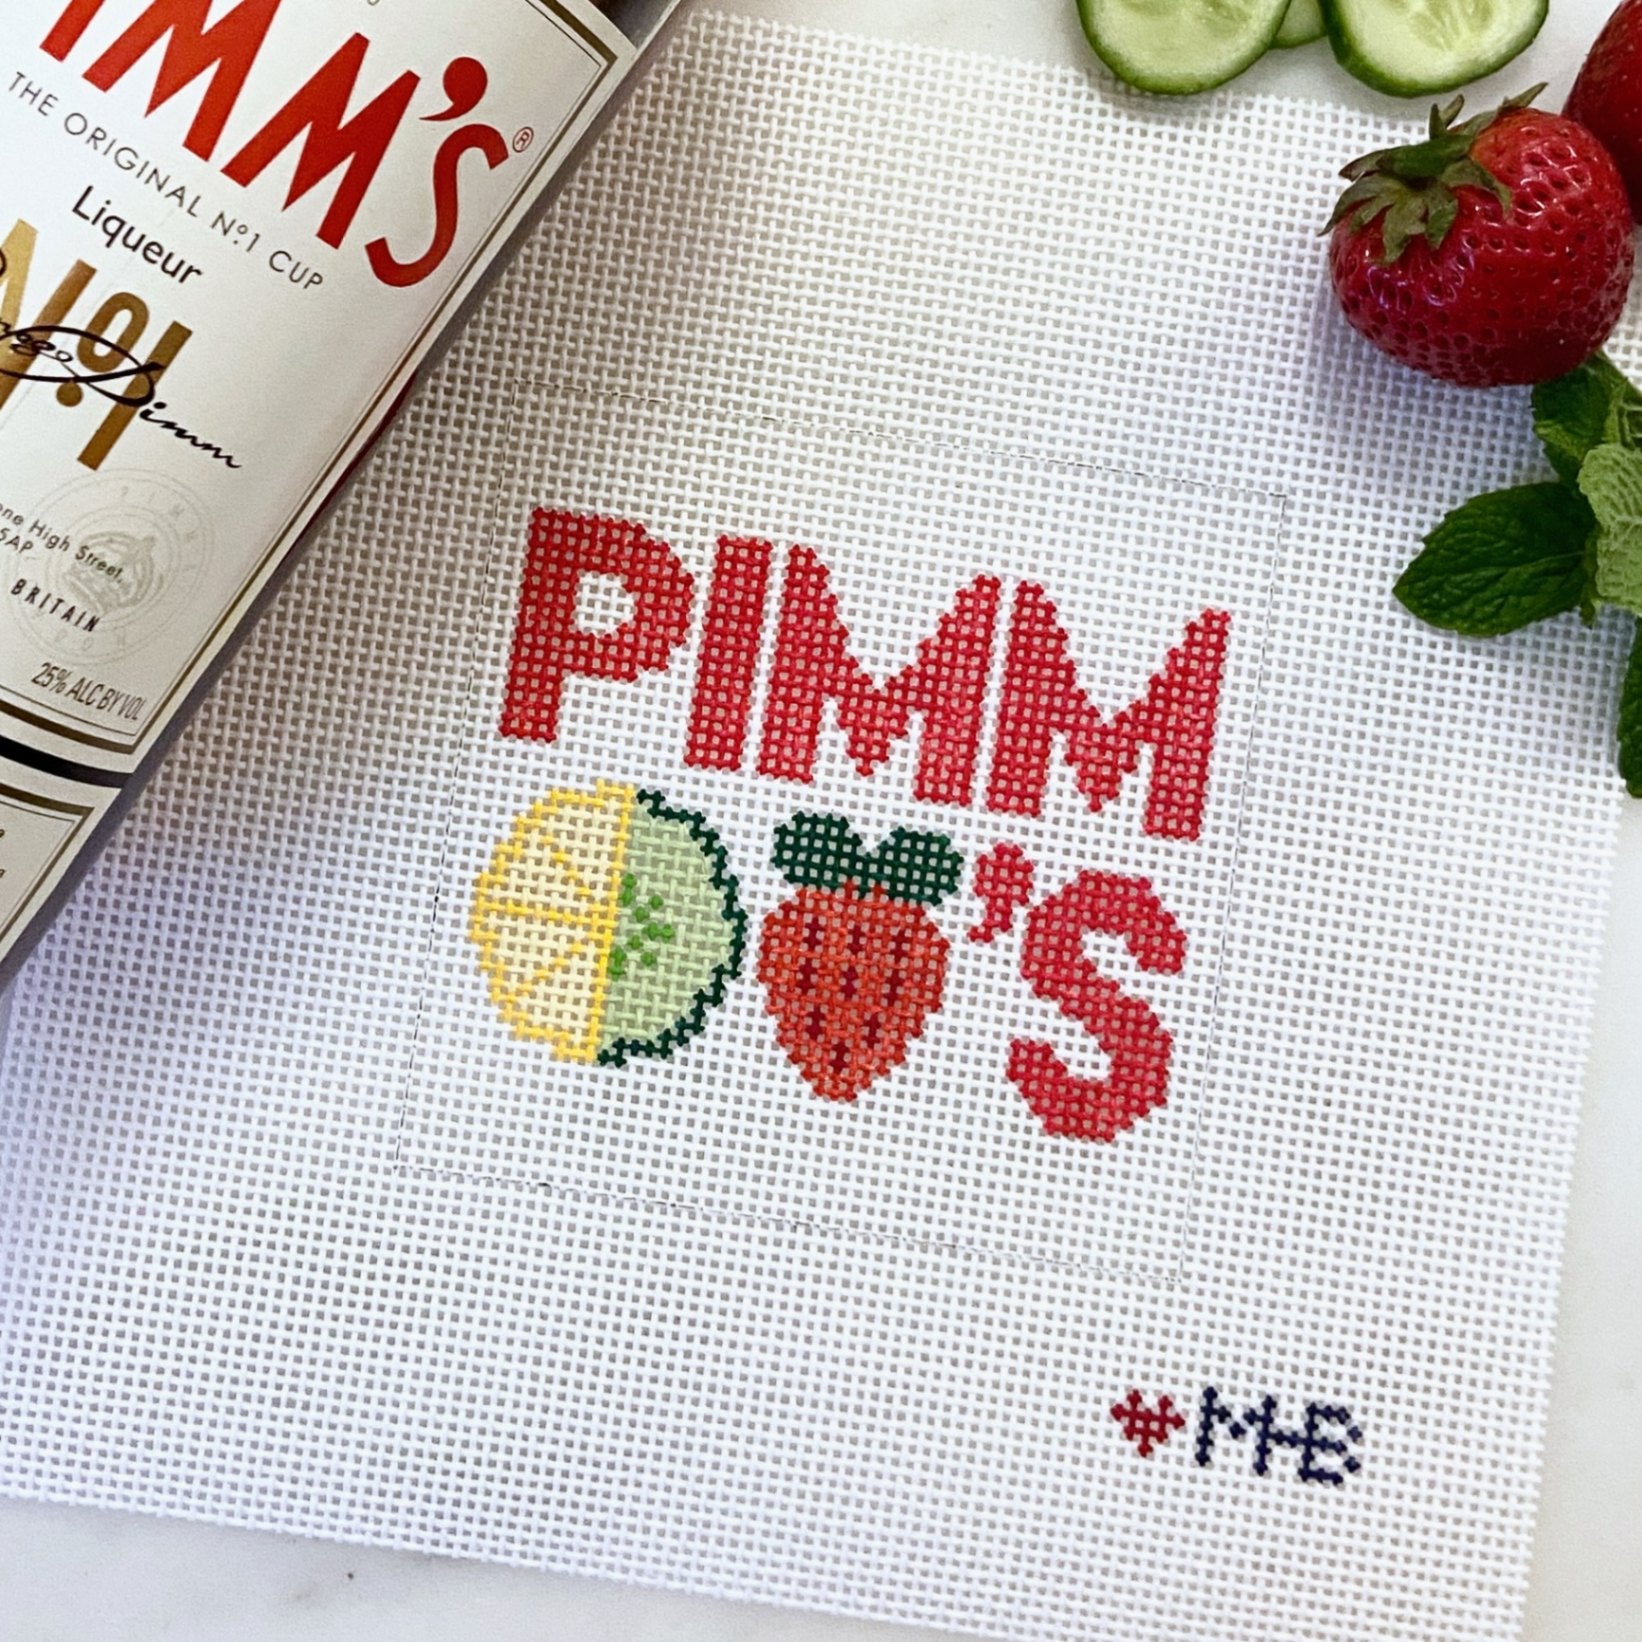 Pimms CUP ENT108